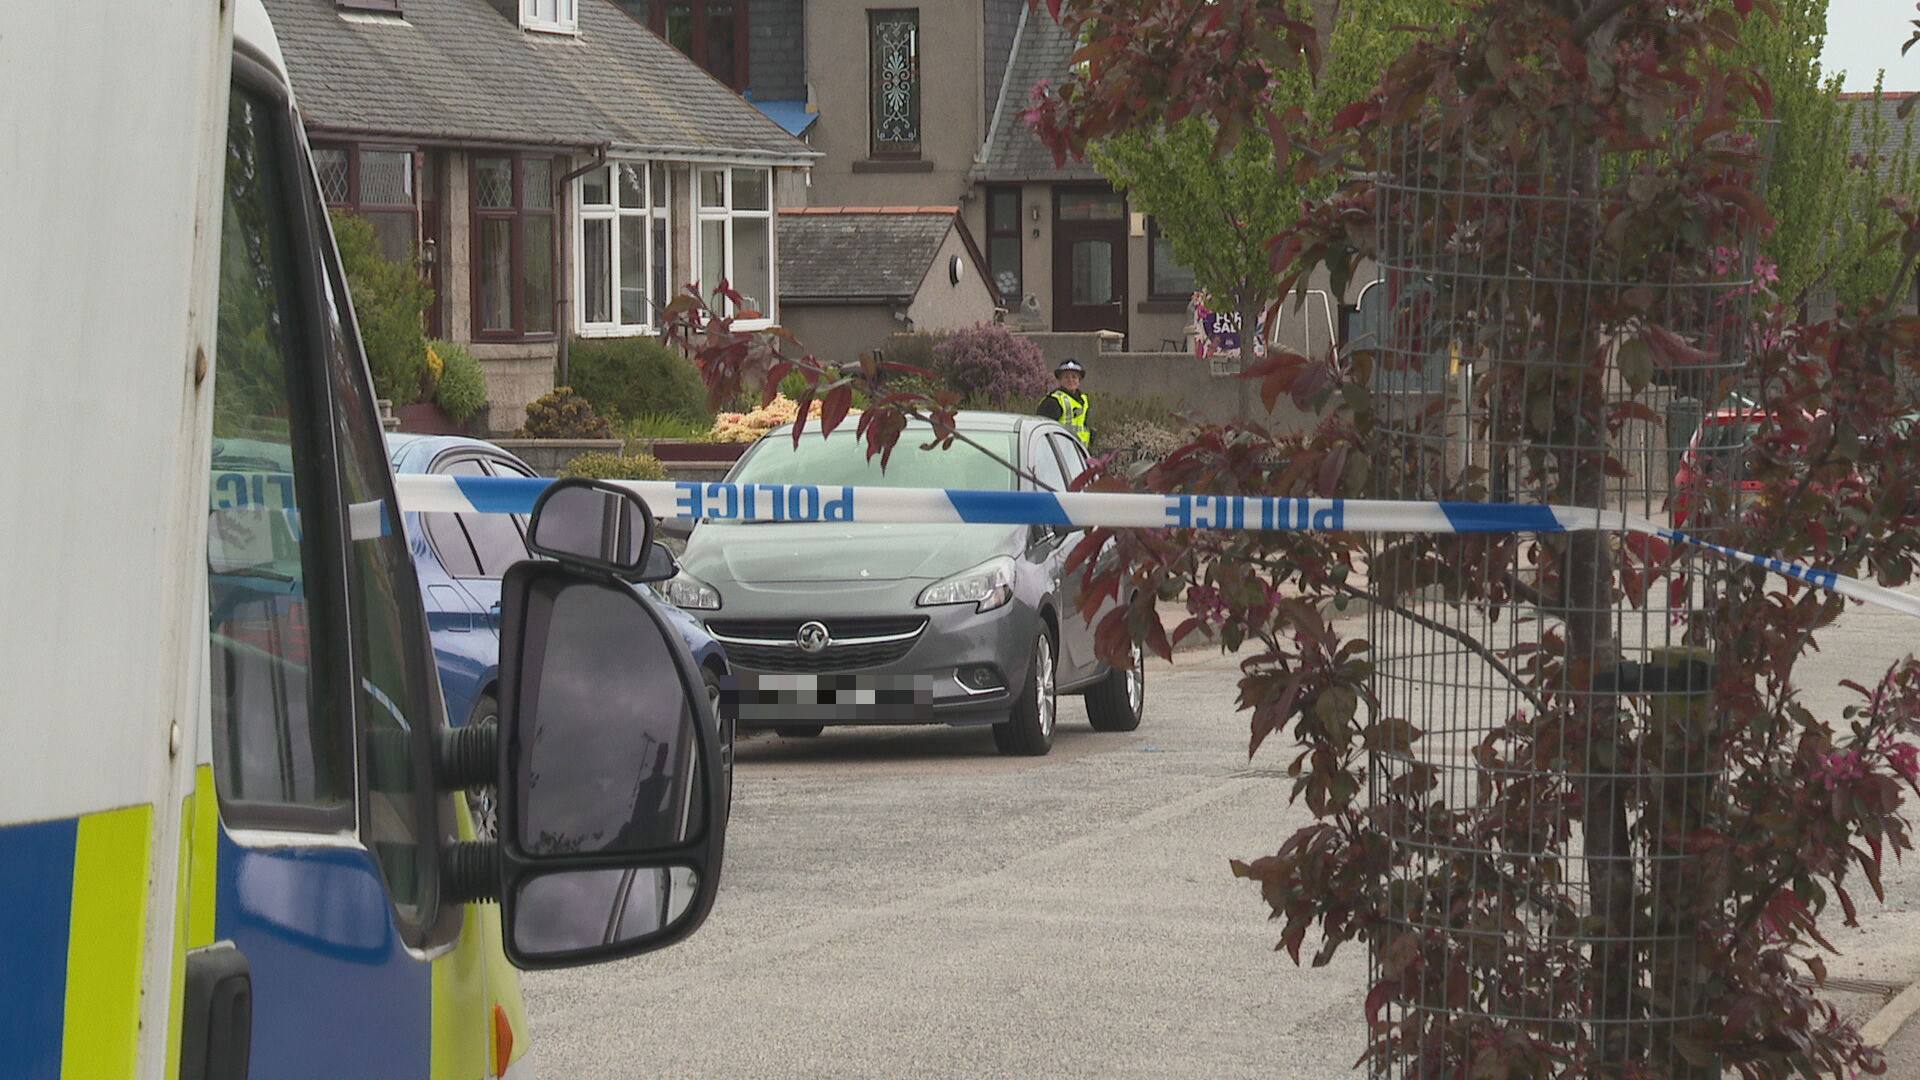 A 39-year-old man has died in hospital with two arrested in connection with assault 